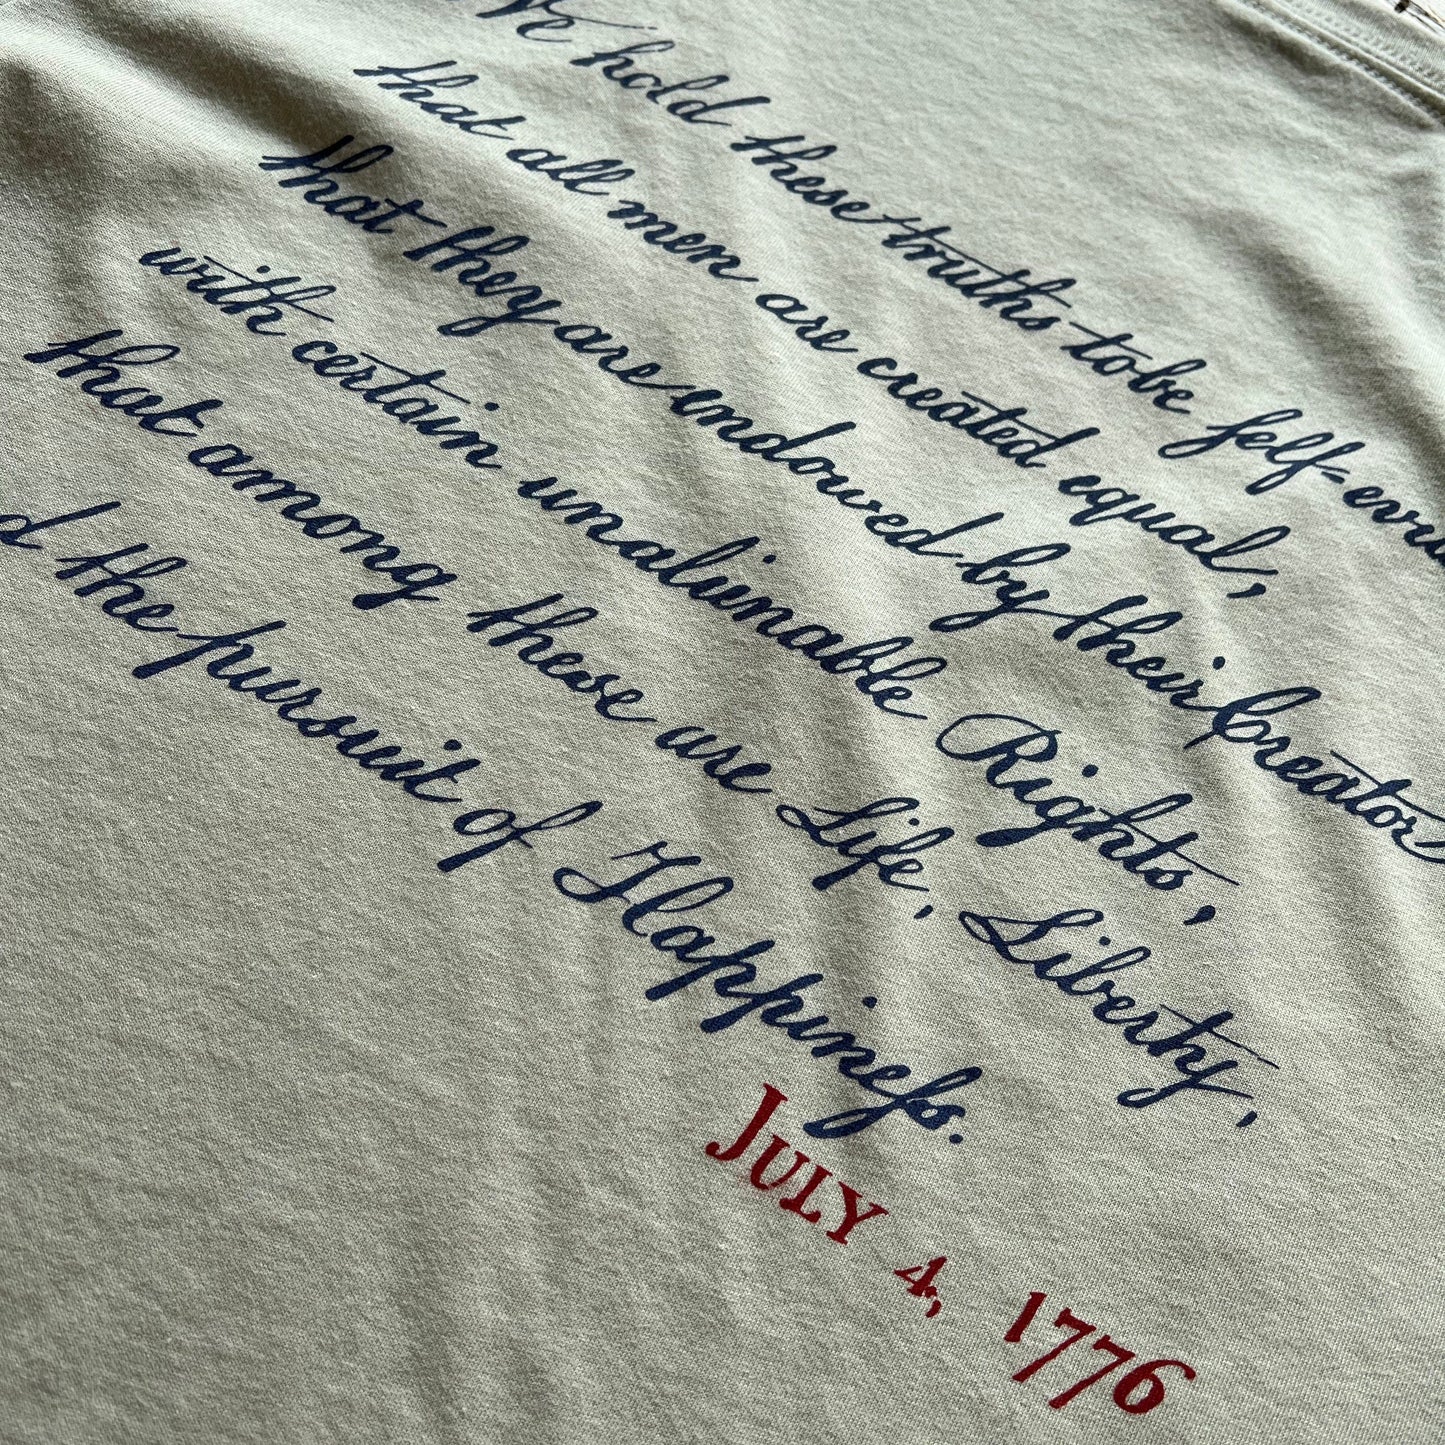 Close-up of back of "We hold these truths - July 4, 1776” v-neck shirt from The History List store in Silver